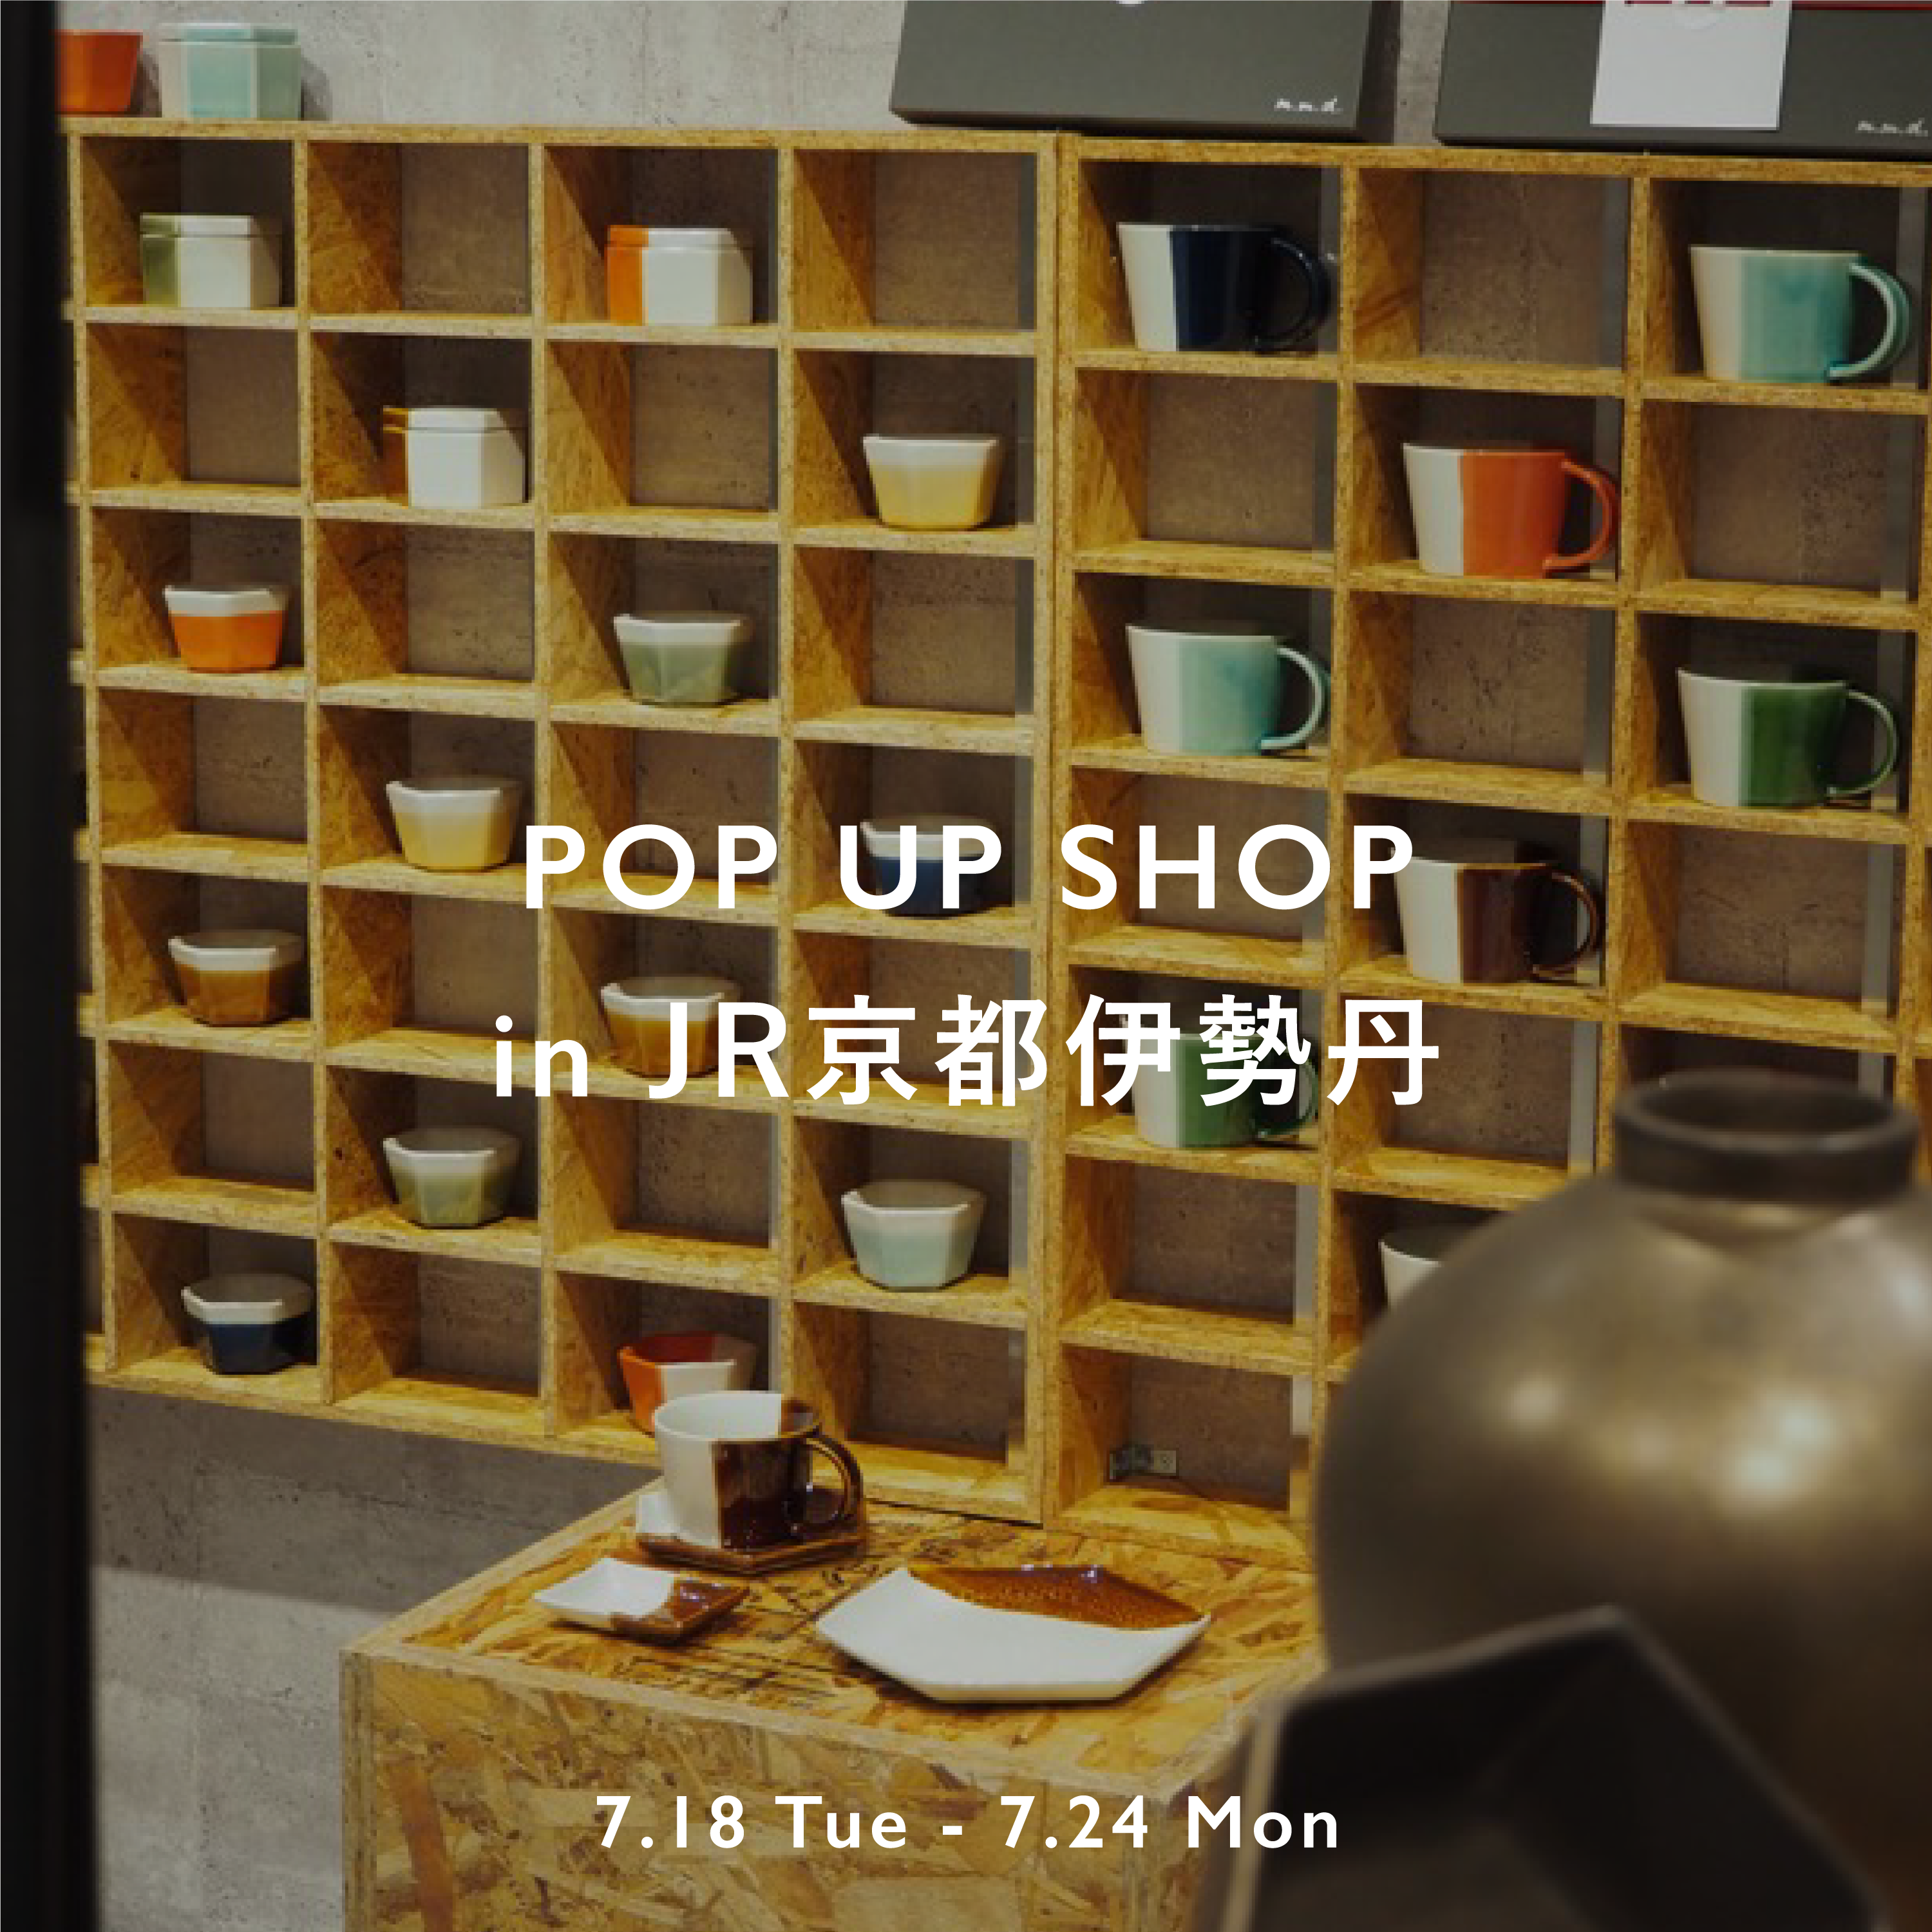 POP UP SHOP in ジェイアール京都伊勢丹